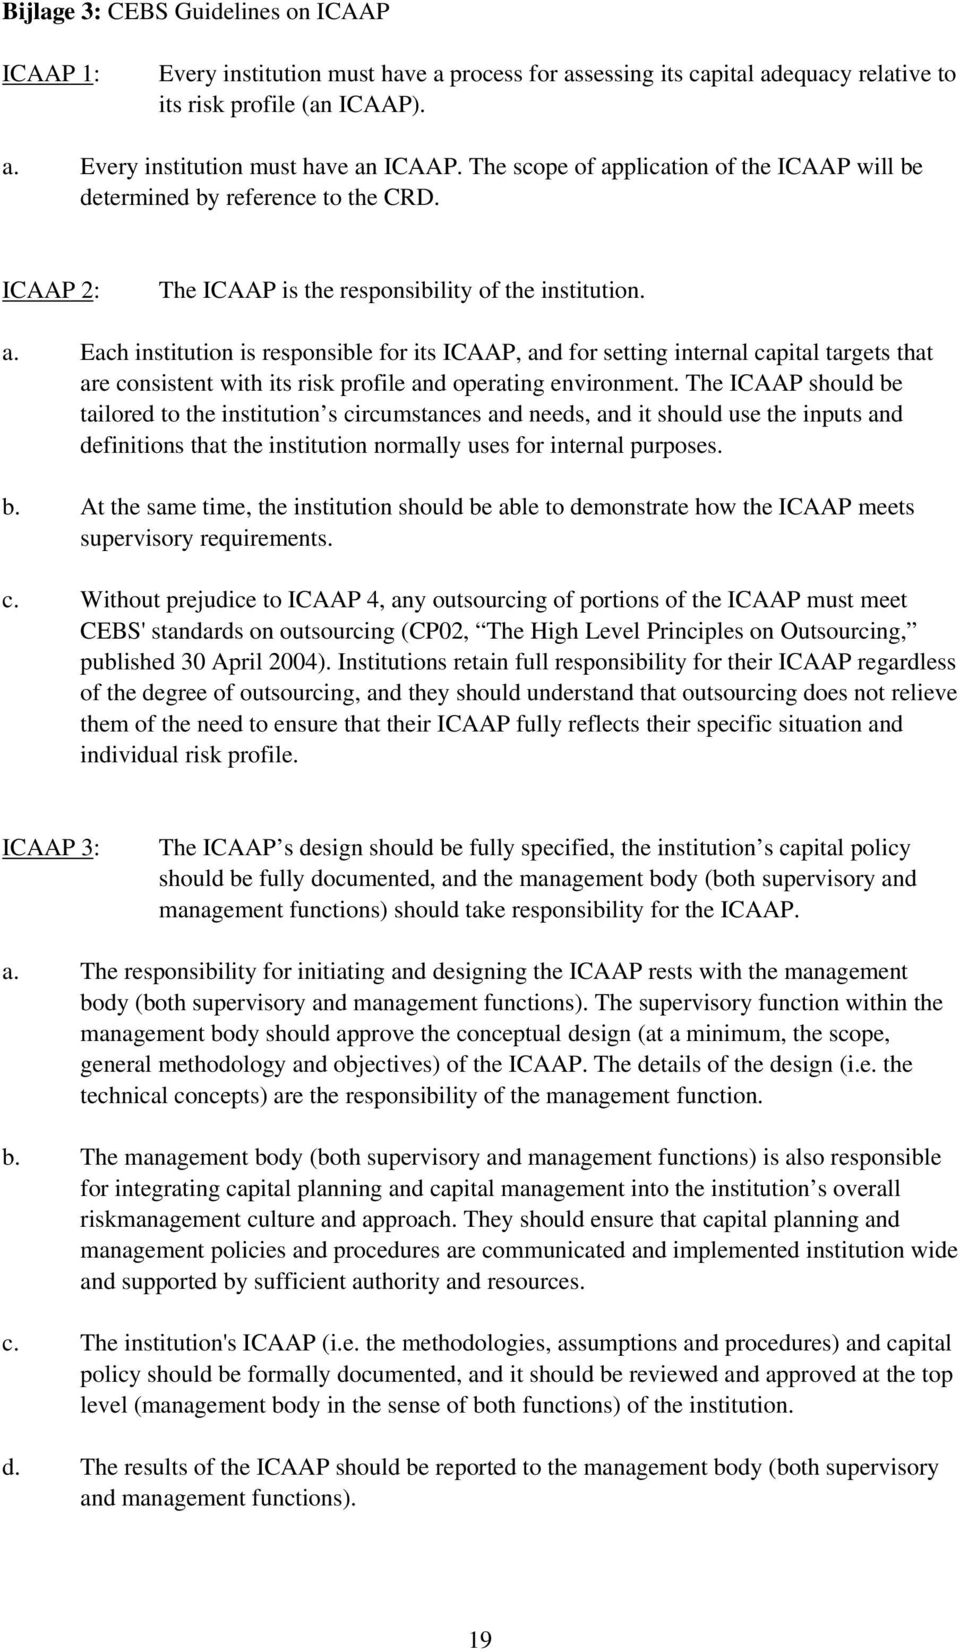 The ICAAP should be tailored to the institution s circumstances and needs, and it should use the inputs and definitions that the institution normally uses for internal purposes. b. At the same time, the institution should be able to demonstrate how the ICAAP meets supervisory requirements.